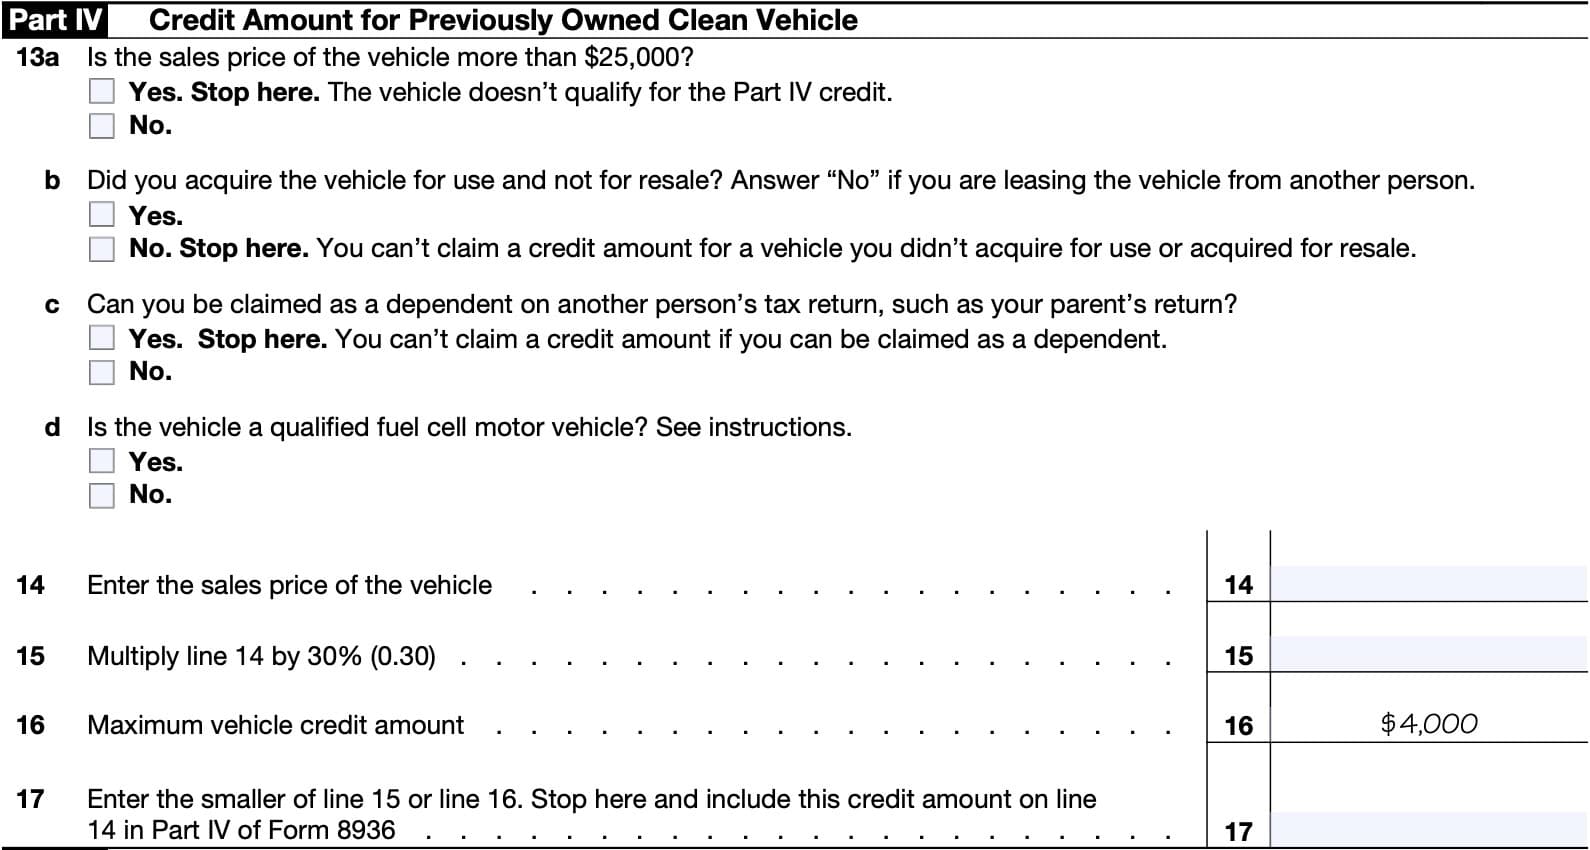 schedule a part iv: credit amount for previously owned clean vehicle